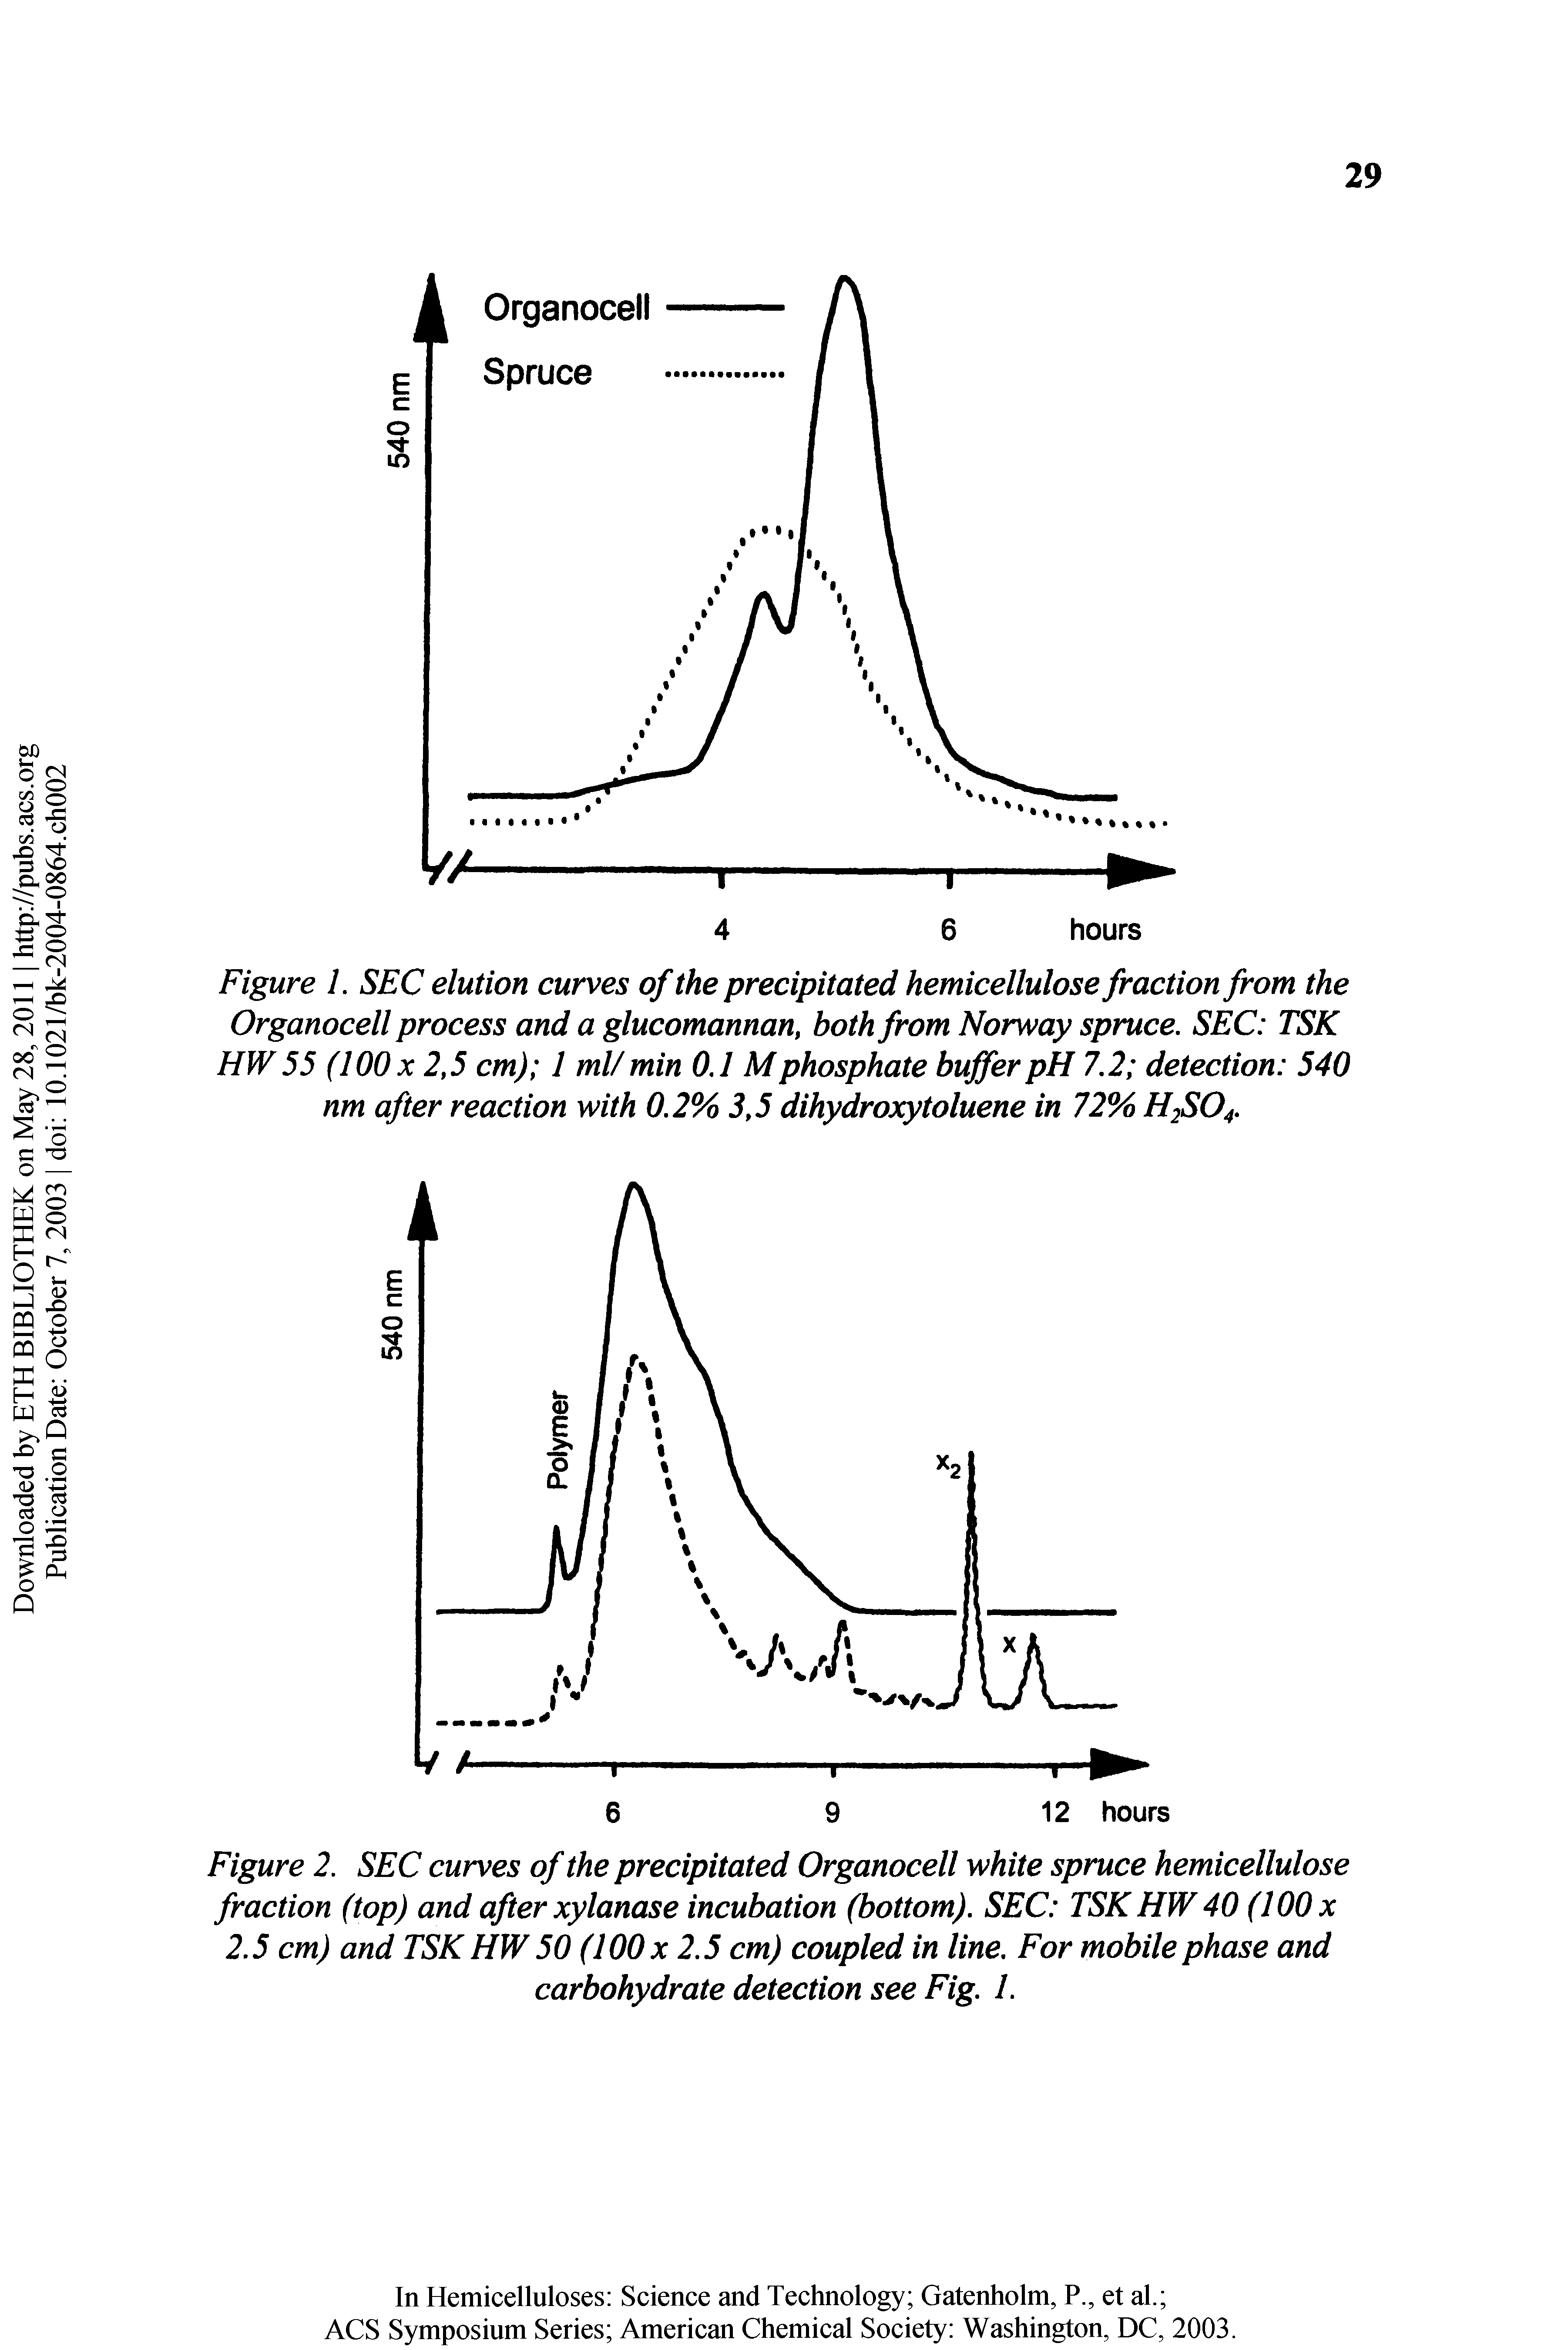 Figure 2. SEC curves of the precipitated Organocell white spruce hemicellulose fraction (top) and after xylanase incubation (bottom). SEC TSK HW 40 (100 x 2.5 cm) and TSK HW 50 (100 x 2.5 cm) coupled in line. For mobile phase and carbohydrate detection see Fig. 1.